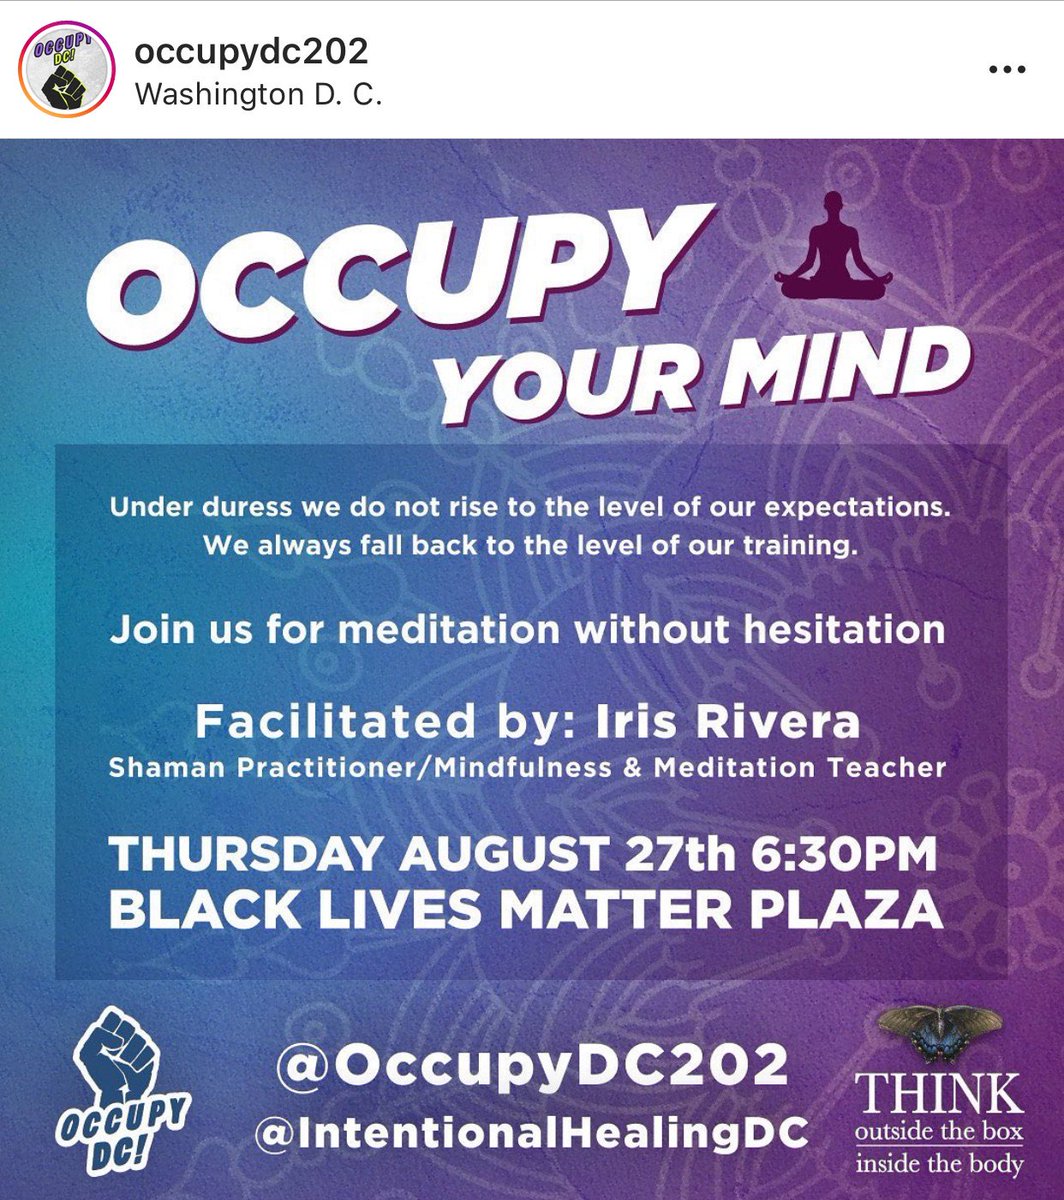 Occupy Your Mind - Meditation Without Hesitation on BLM Plaza at 6:30 pm